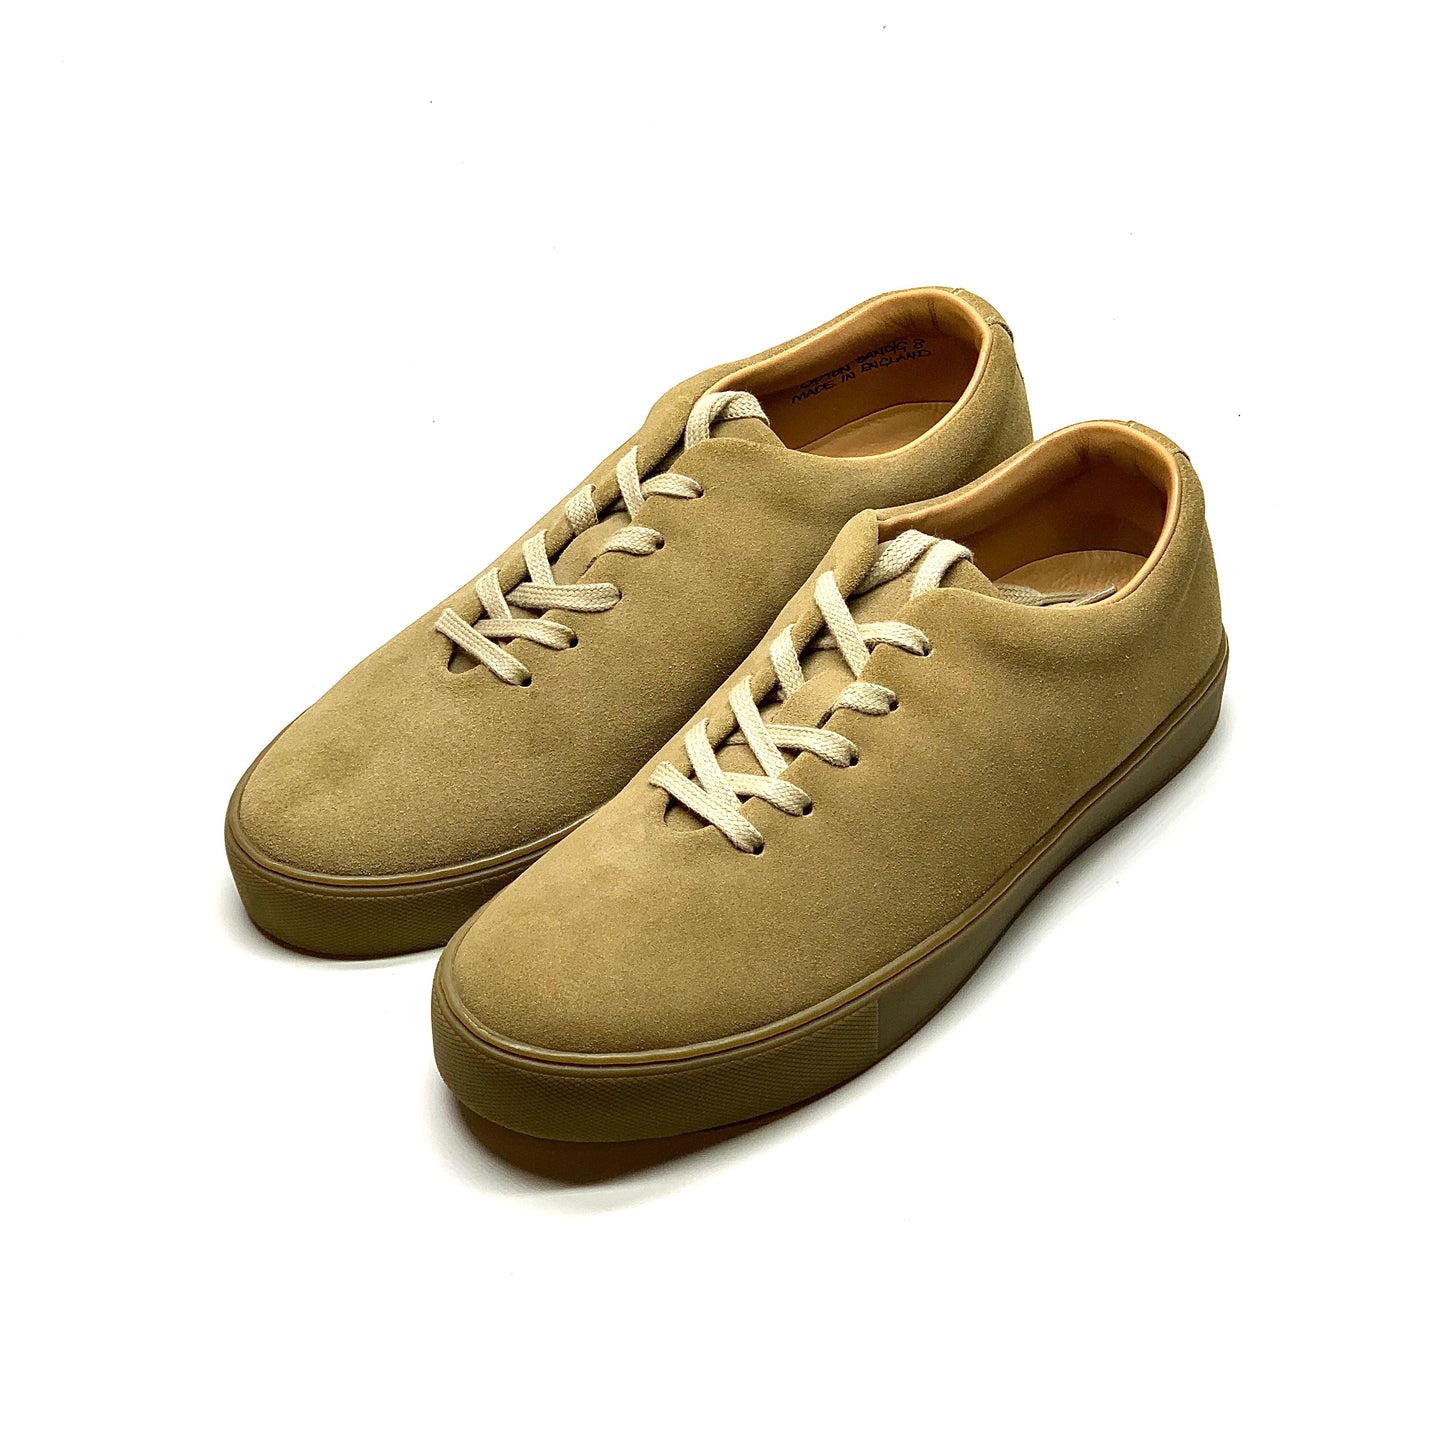 CNP UPTON Wholecut Sneakers Sand Suede/ Gum Sole